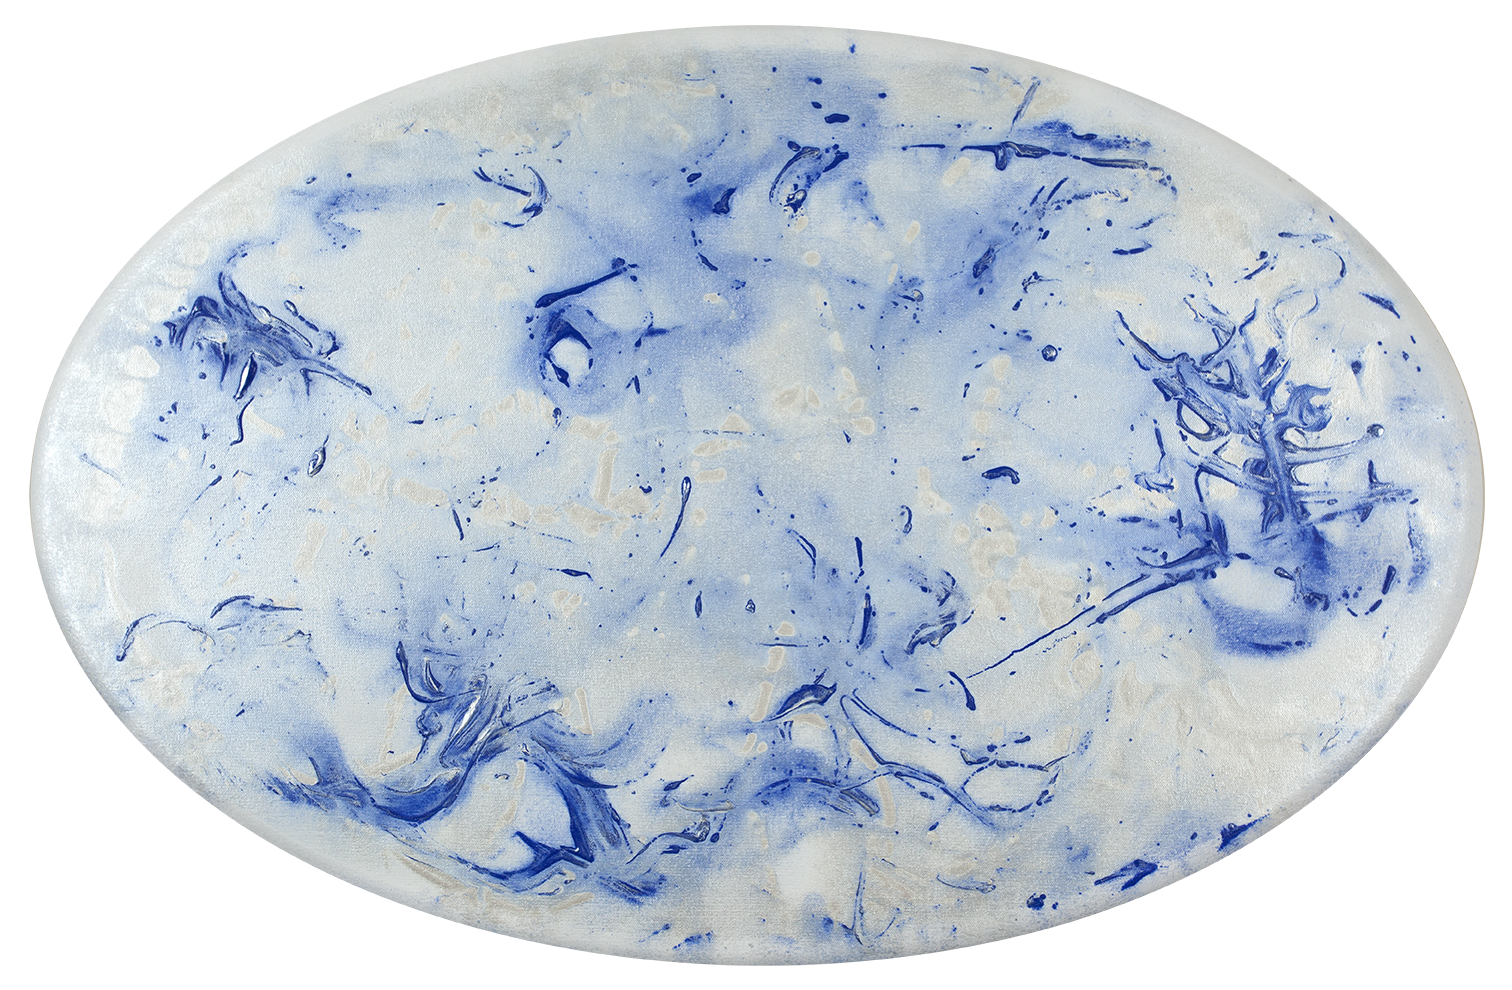  © Alicia R Peterson, *Dancing with YinMn Blue*. Acrylic on 24 x 36-inch convex oval canvas.  Special price $2,900.